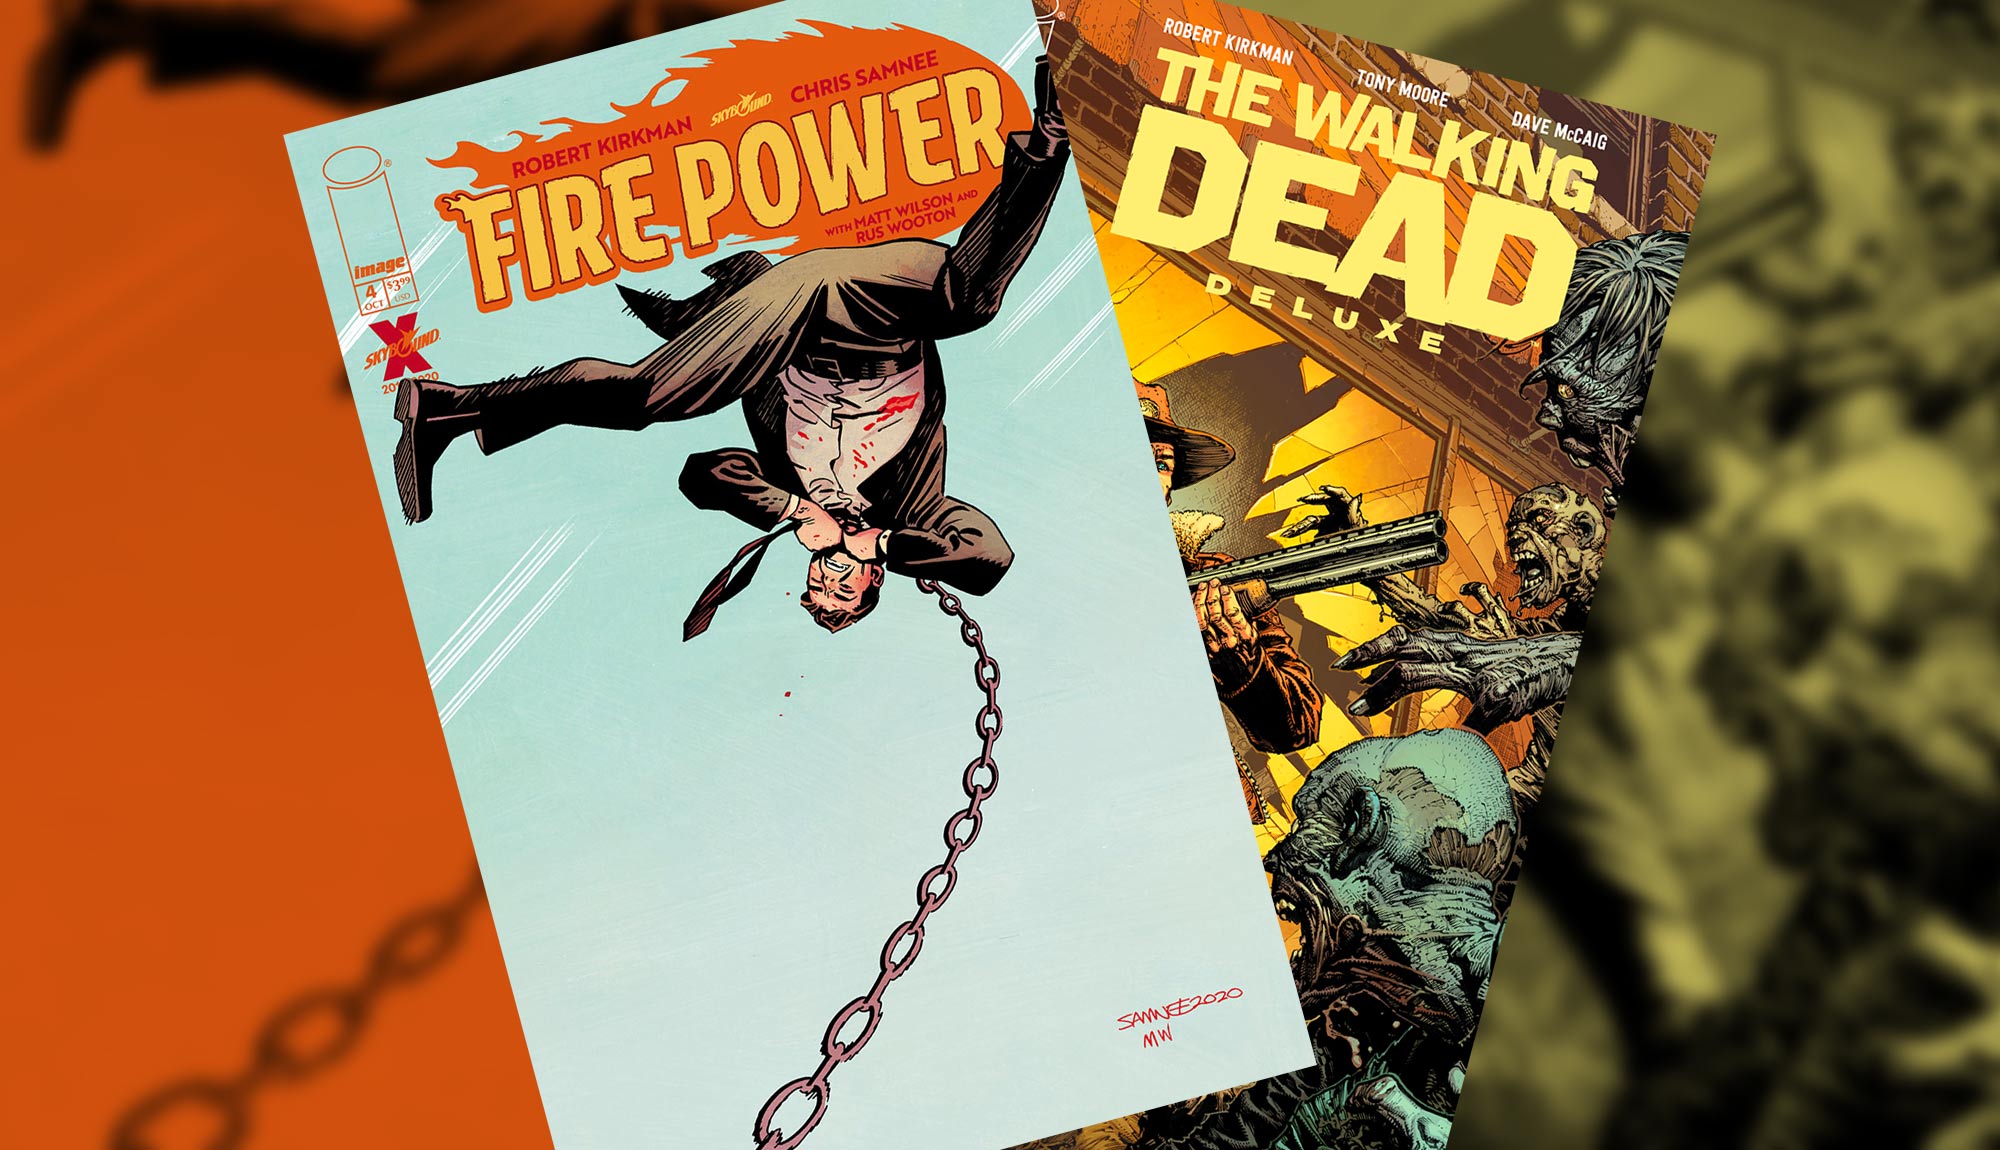 This Week’s Comics: FIRE POWER, THE WALKING DEAD DELUXE